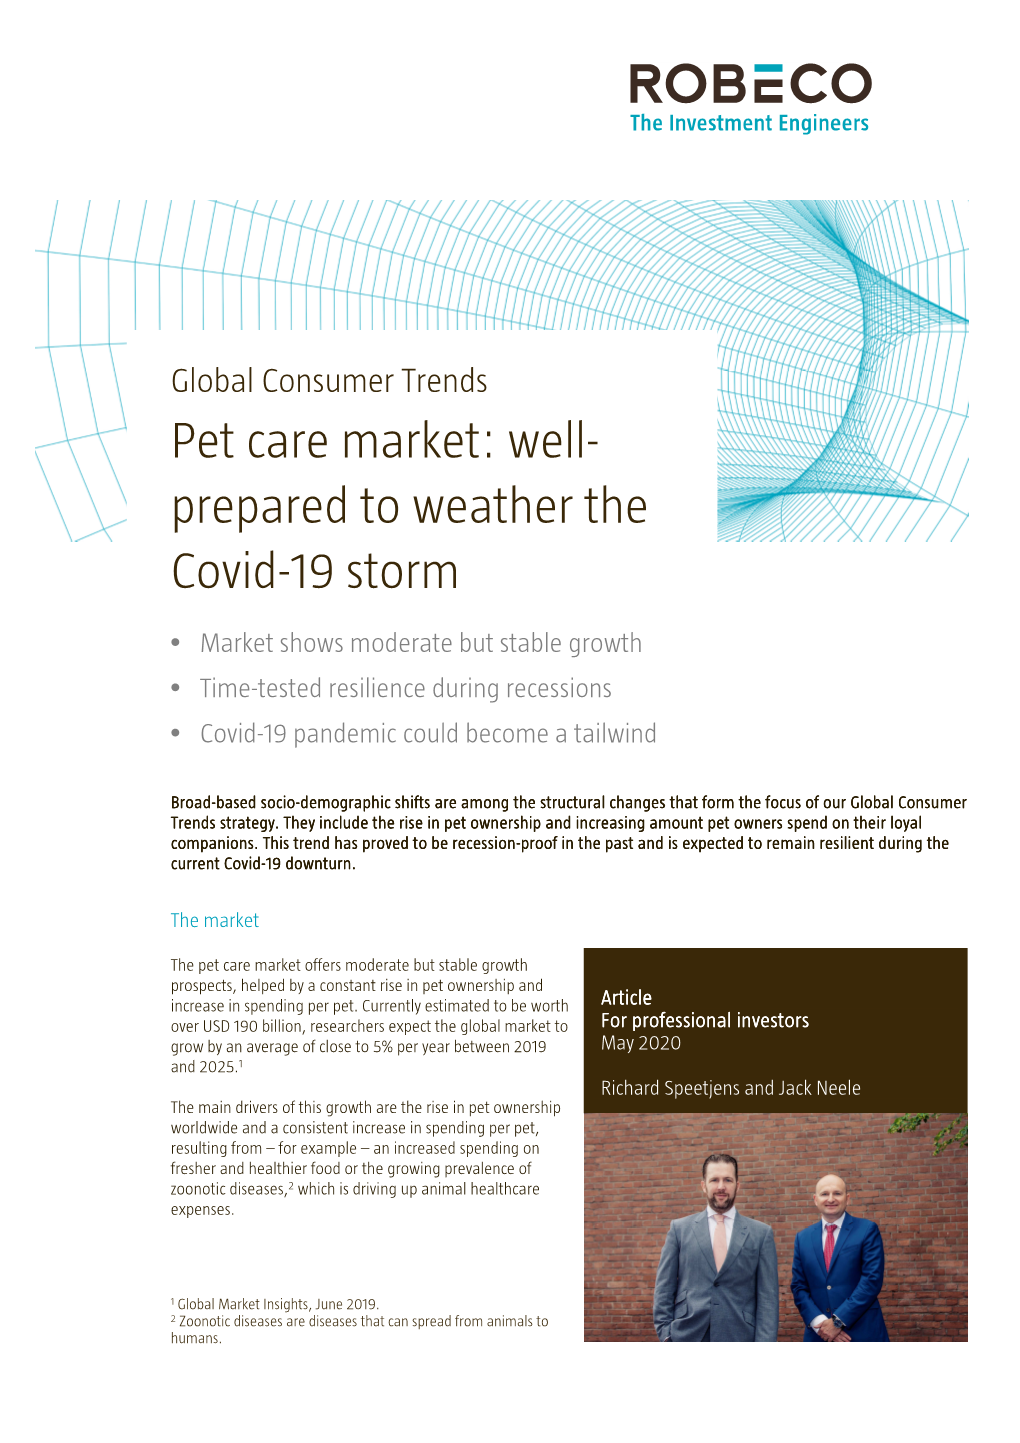 Pet Care Market: Well- Prepared to Weather the Covid-19 Storm